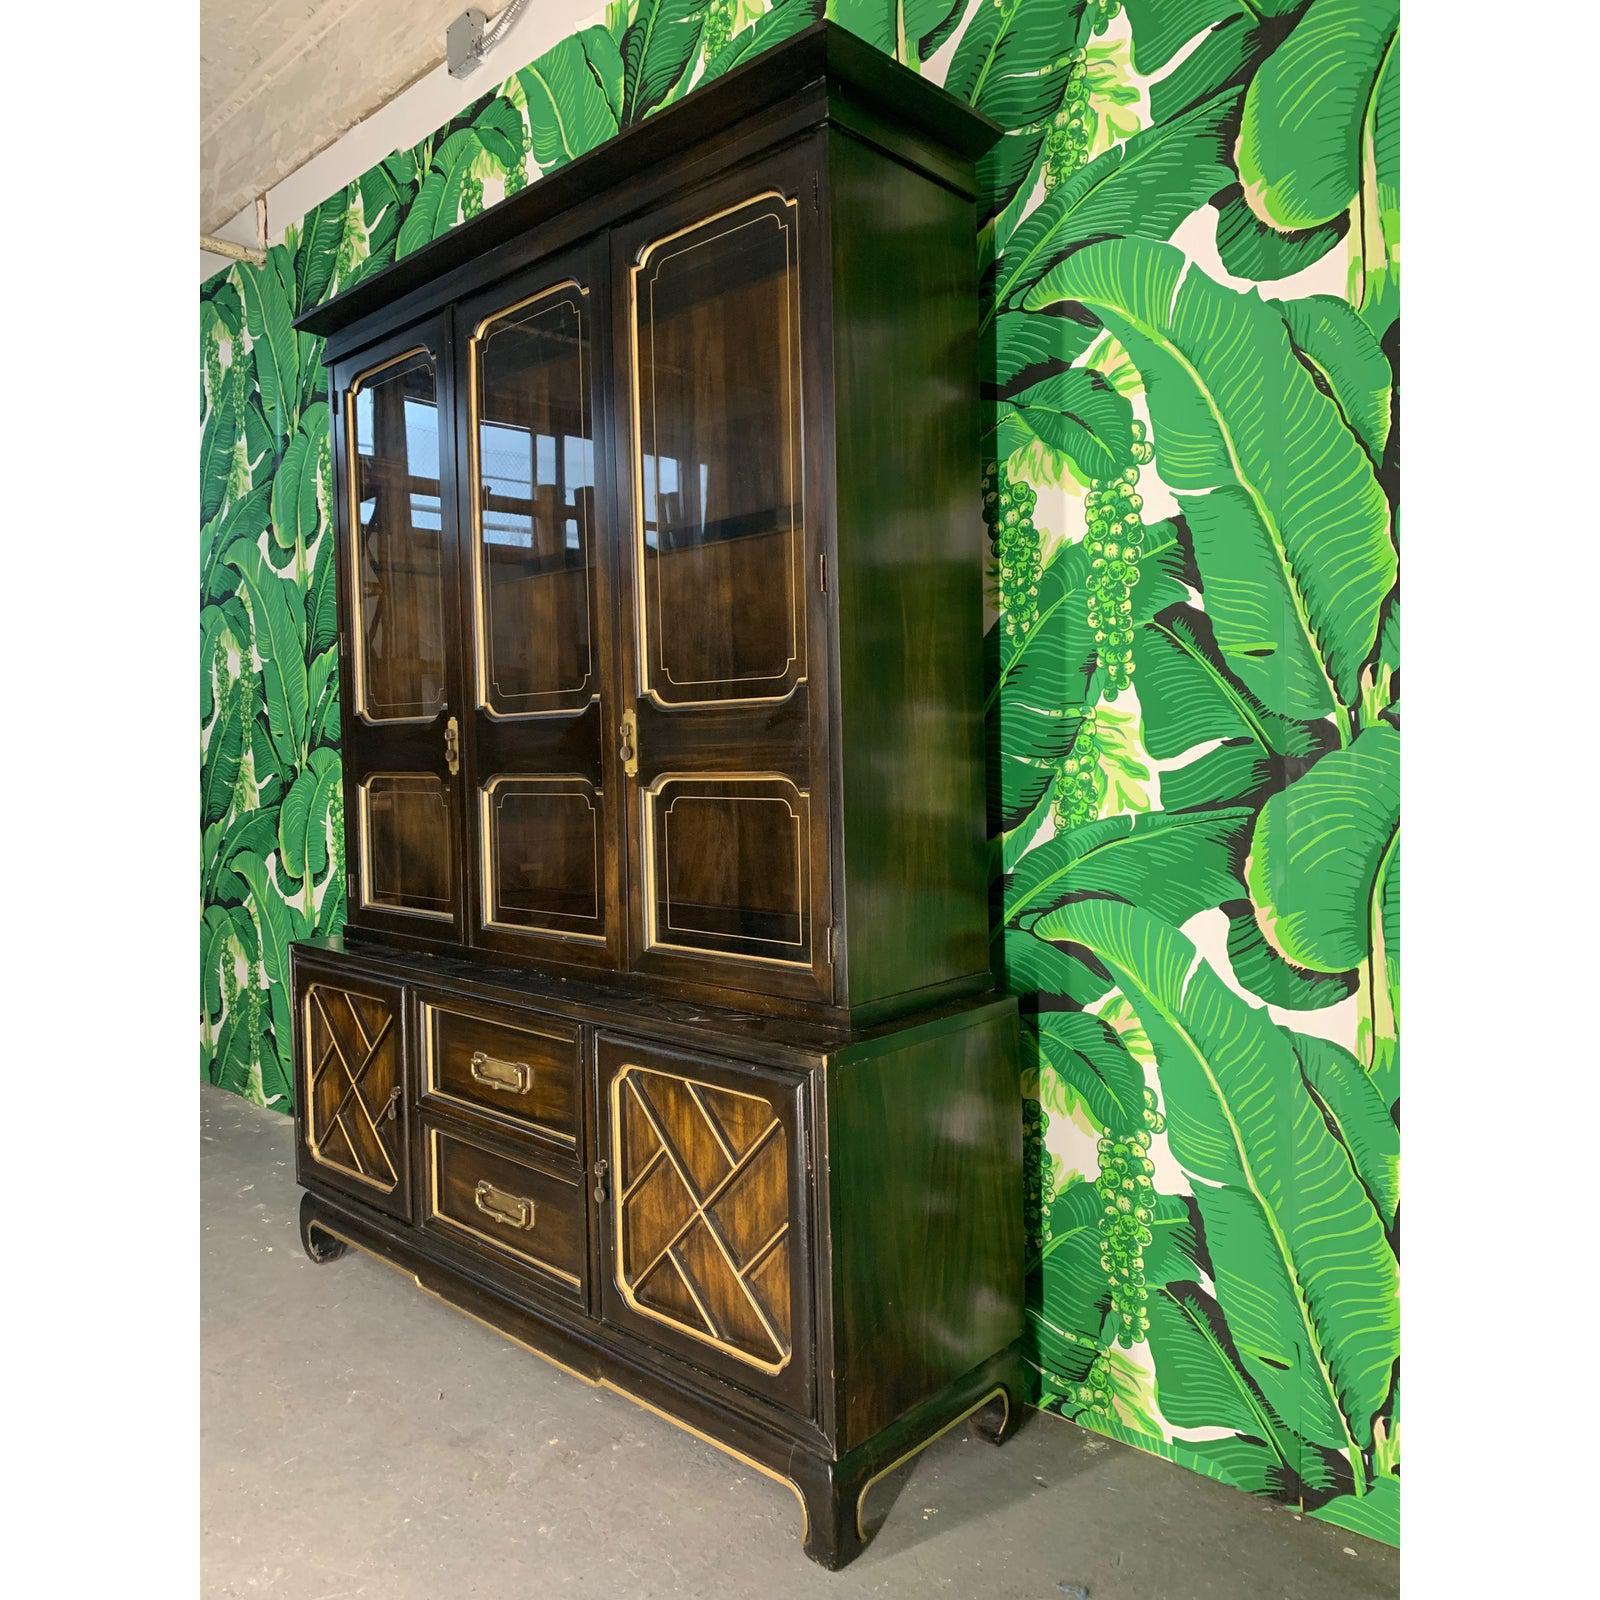 Asian style china cabinet features glass shelves and Chippendale style detailing outlined in gold. Very good vintage condition with minor imperfections consistent with age.

    